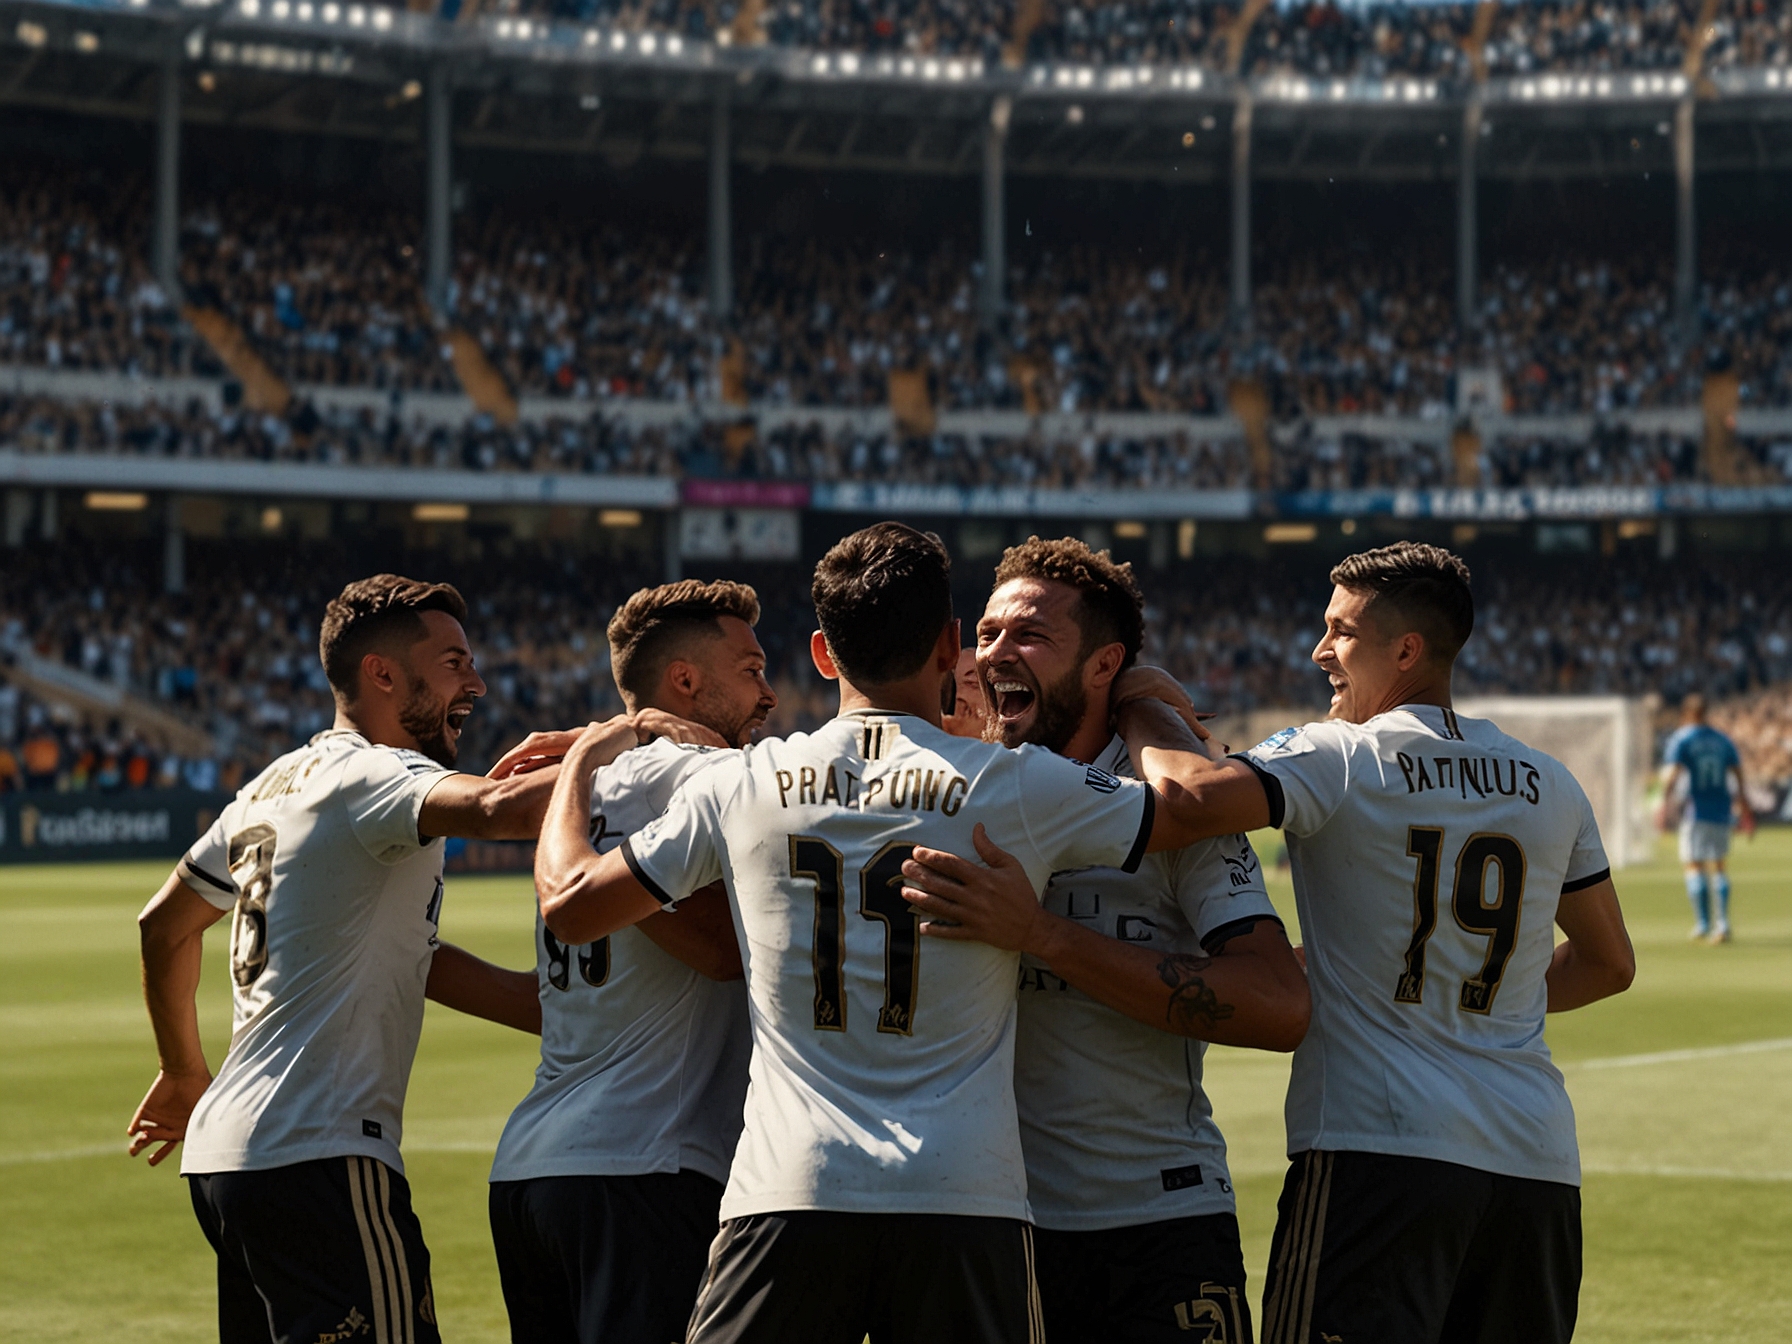 LAFC players celebrating a goal during their 6-2 victory over the San Jose Earthquakes. The image captures the jubilation of the team as they dominate the match at their home ground.